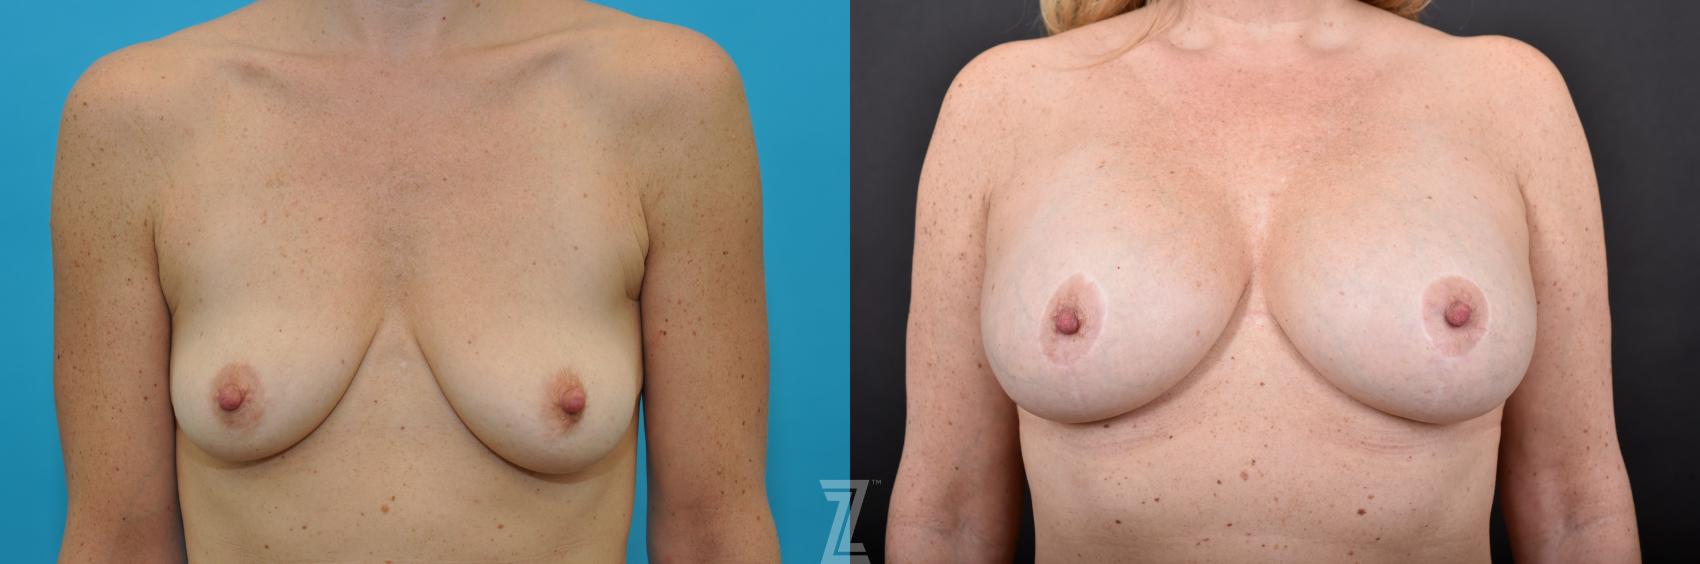 Breast Augmentation with a Breast Lift Before & After Photo | Austin, TX | The Piazza Center for Plastic Surgery & Advanced Skin Care